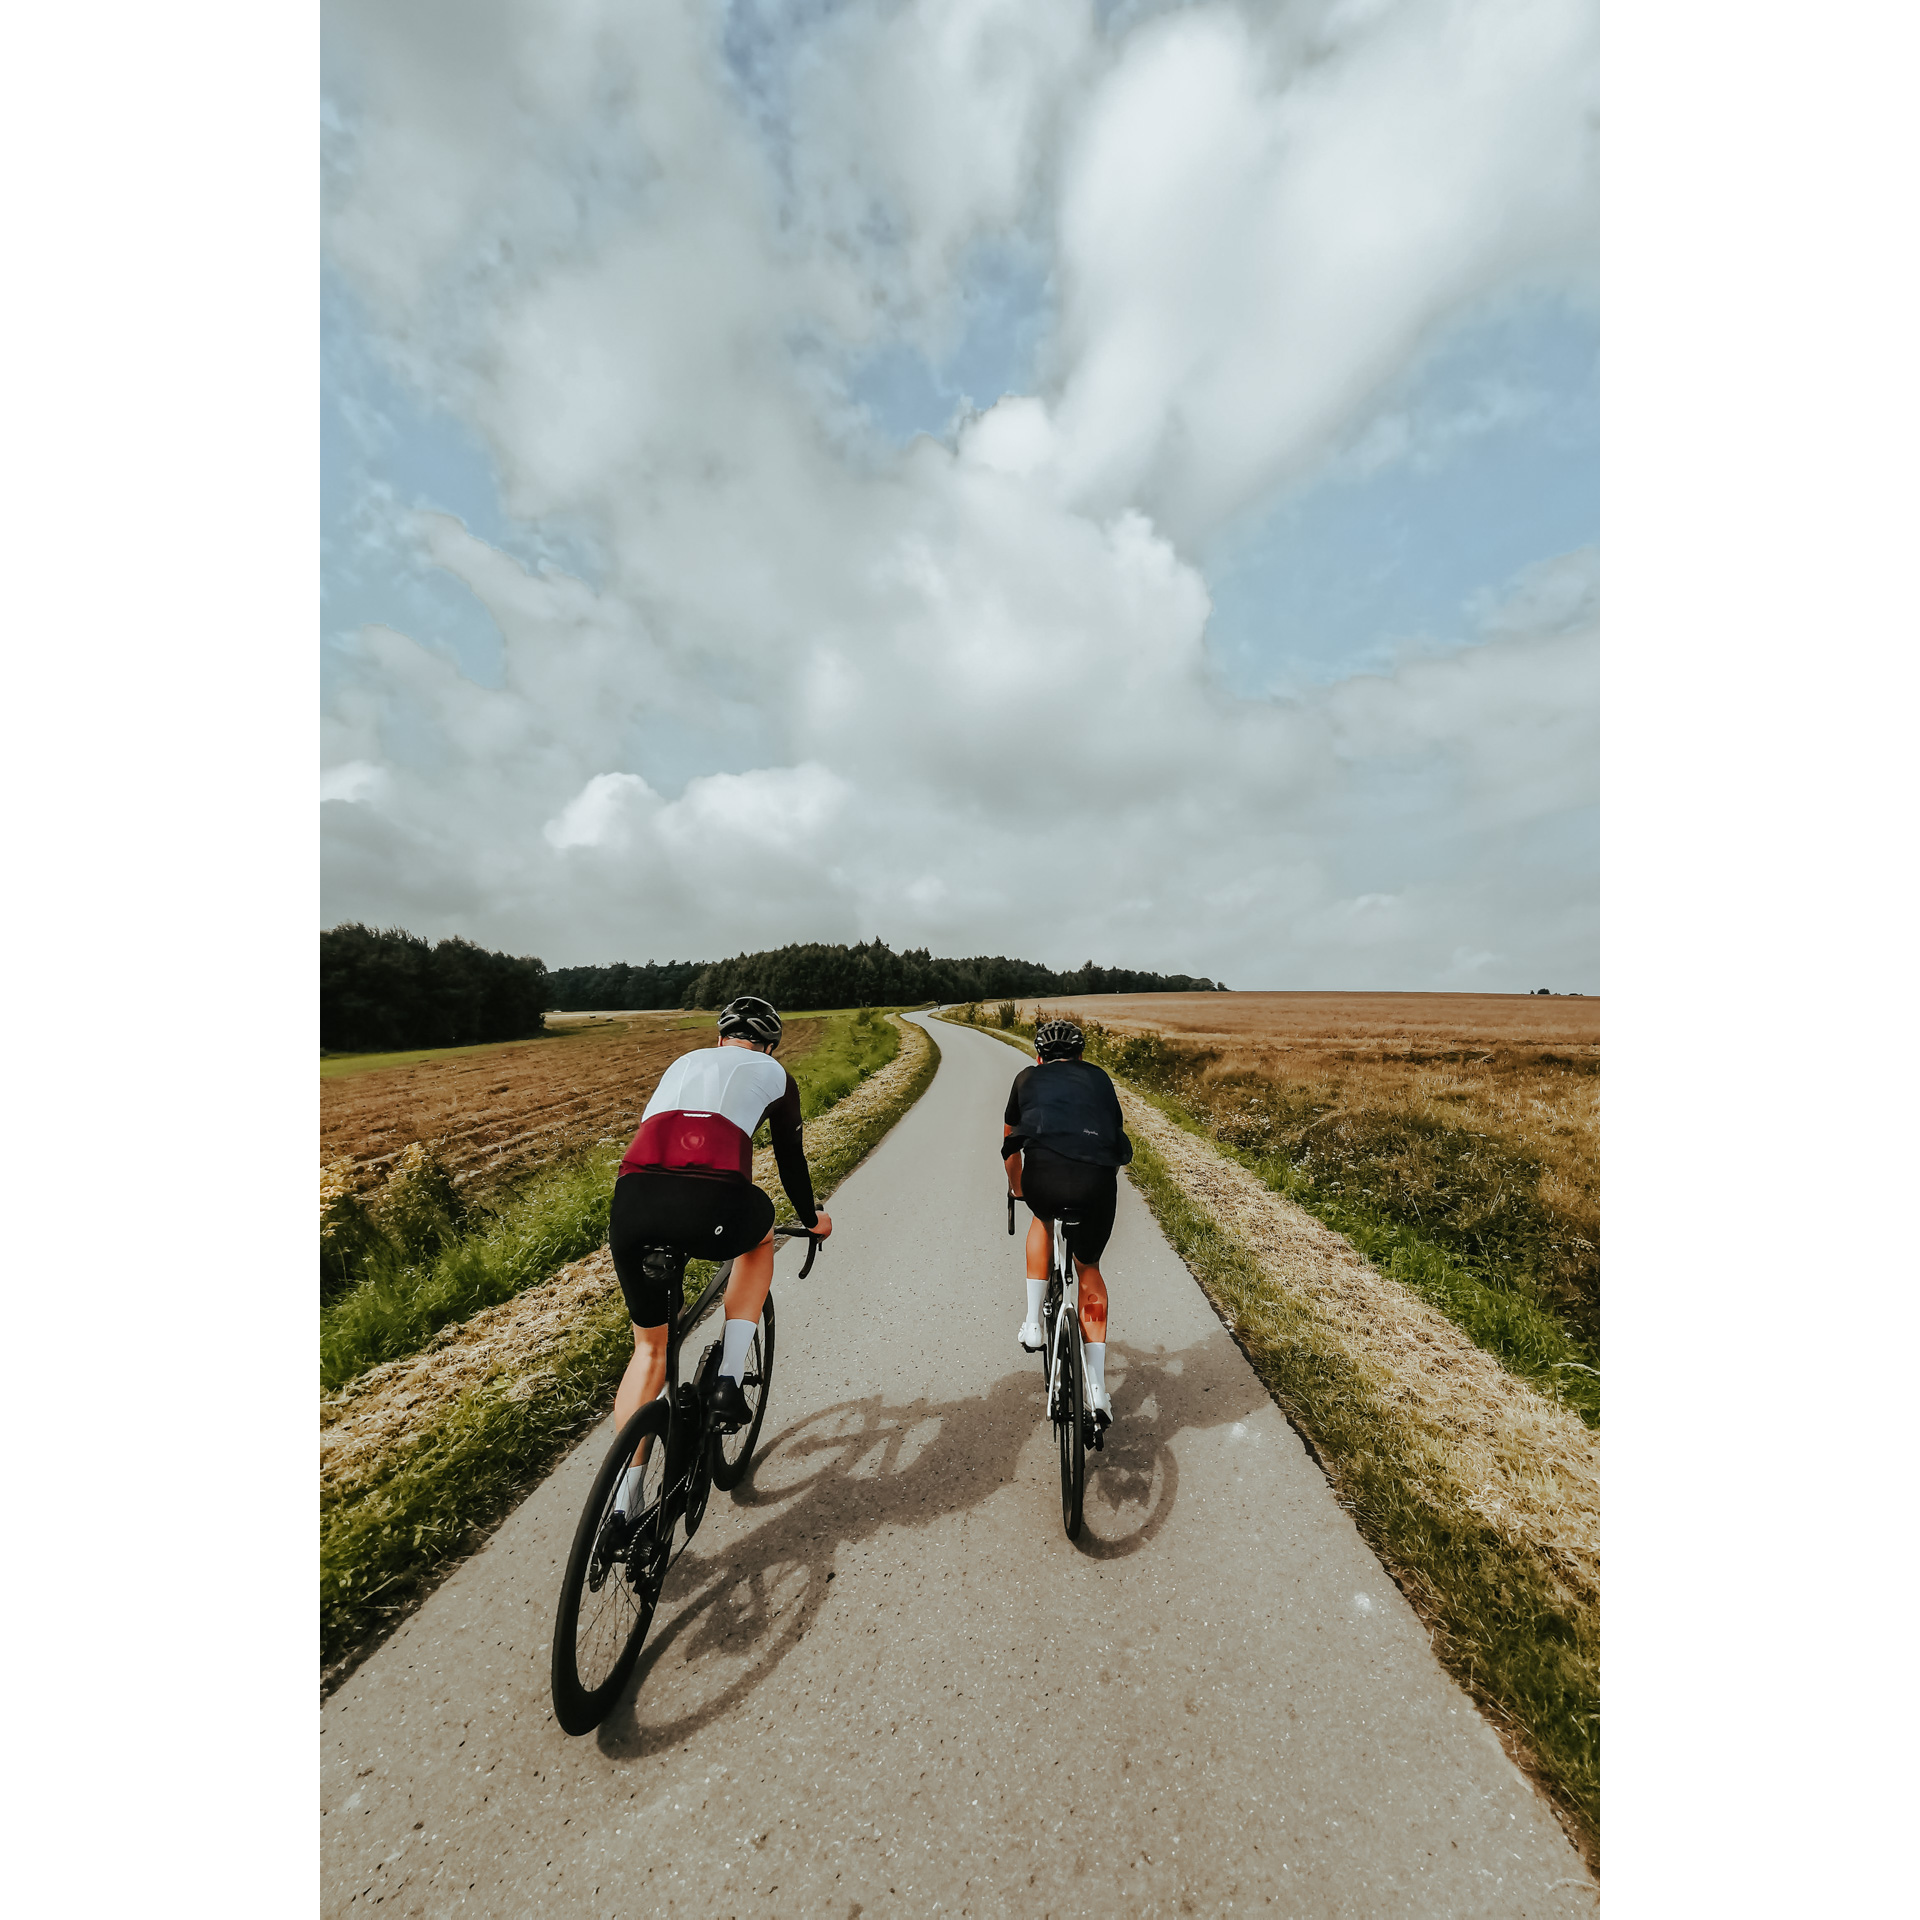 Two cyclists in cycling clothes and helmets riding side by side on a narrow asphalt road among agricultural fields towards the forest